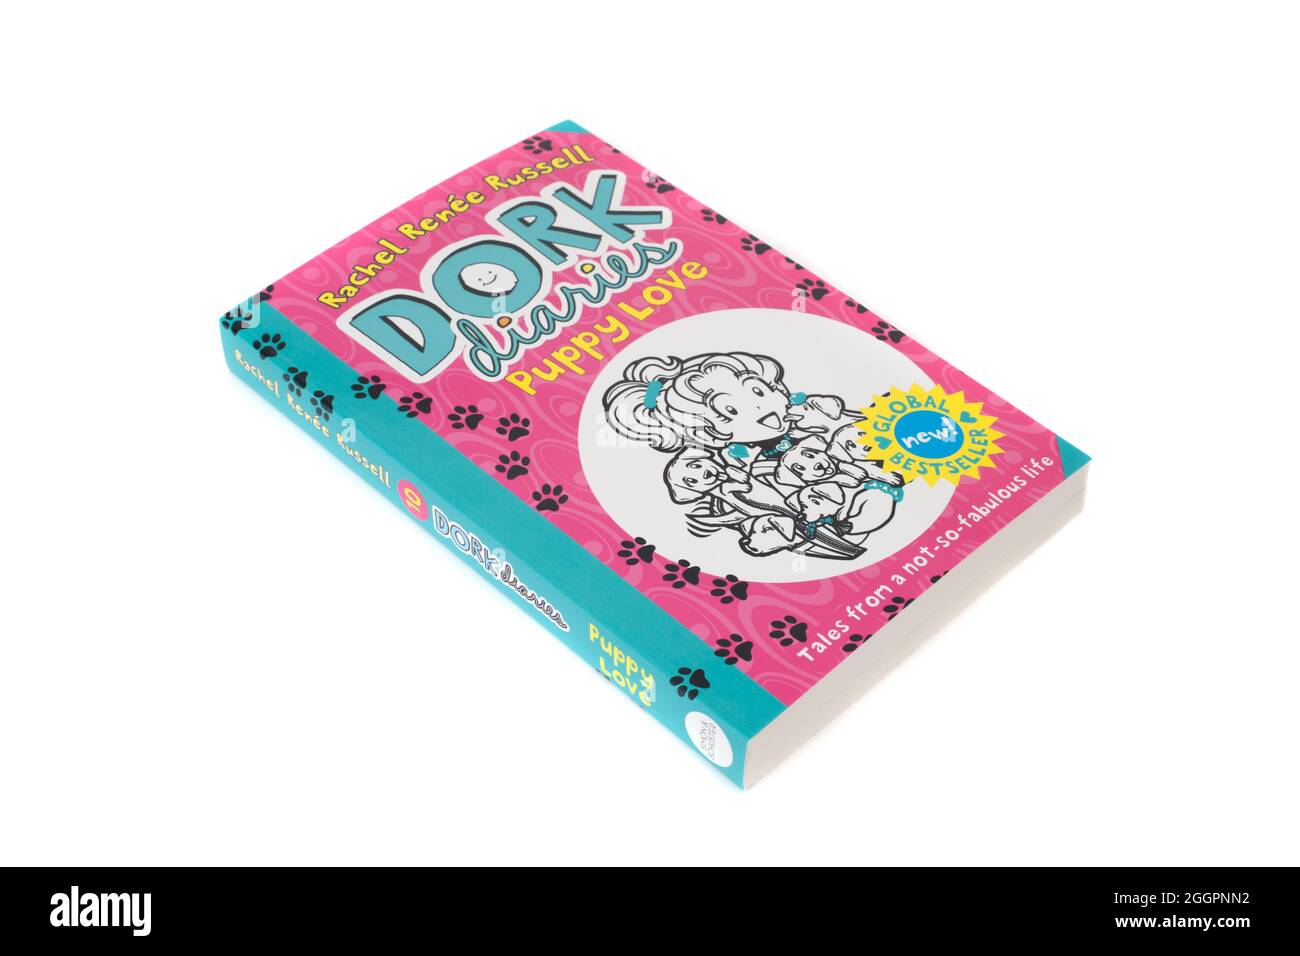 The book, Puppy Love, The Dork Diaries by Rachel Renee Russell Stock Photo